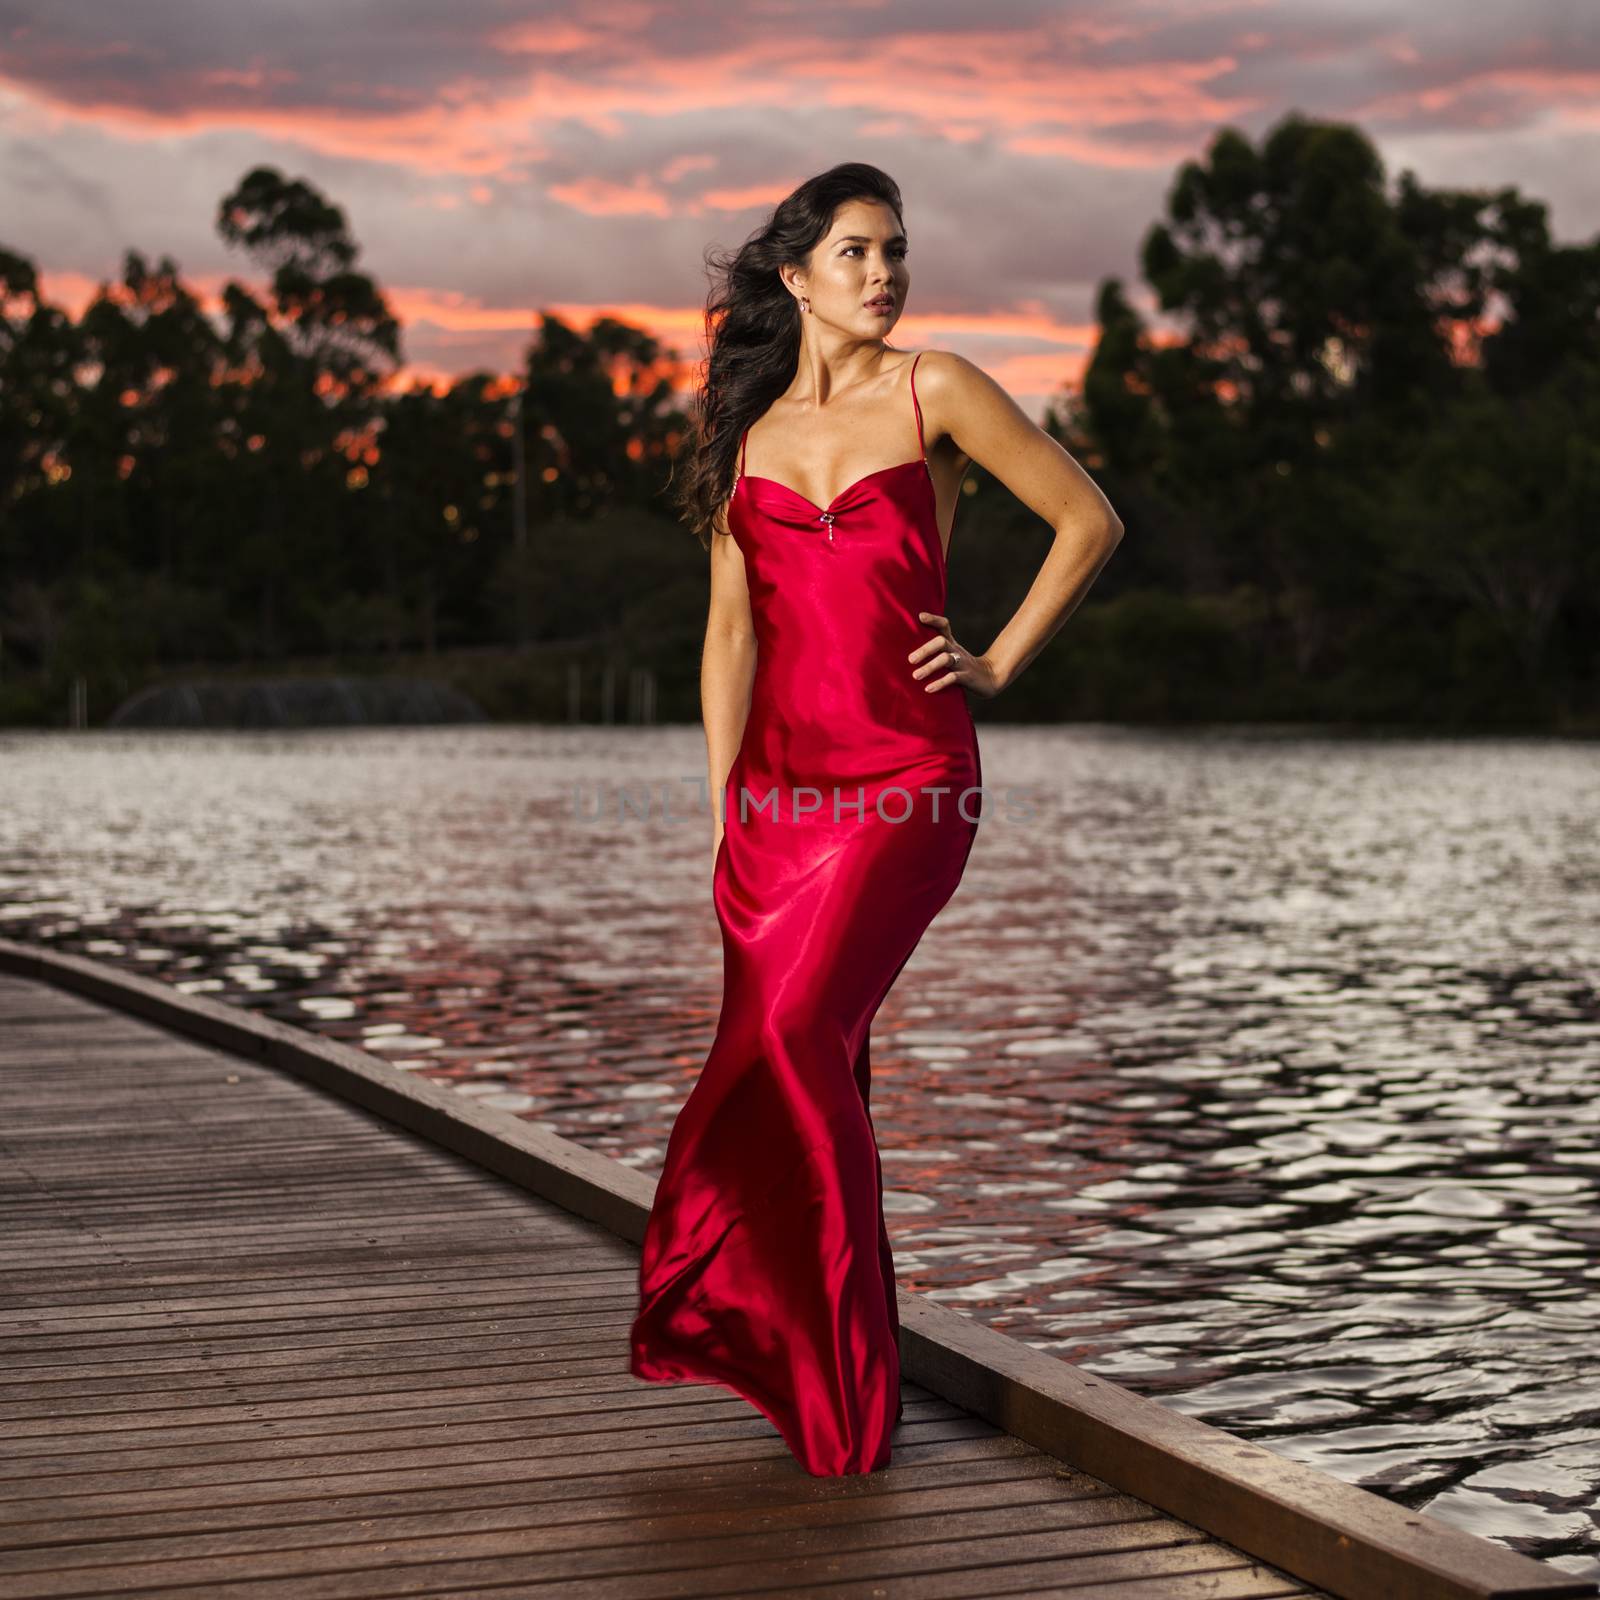 Beautiful young woman wearing a long red silk formal dress in the gardens in the afternoon.